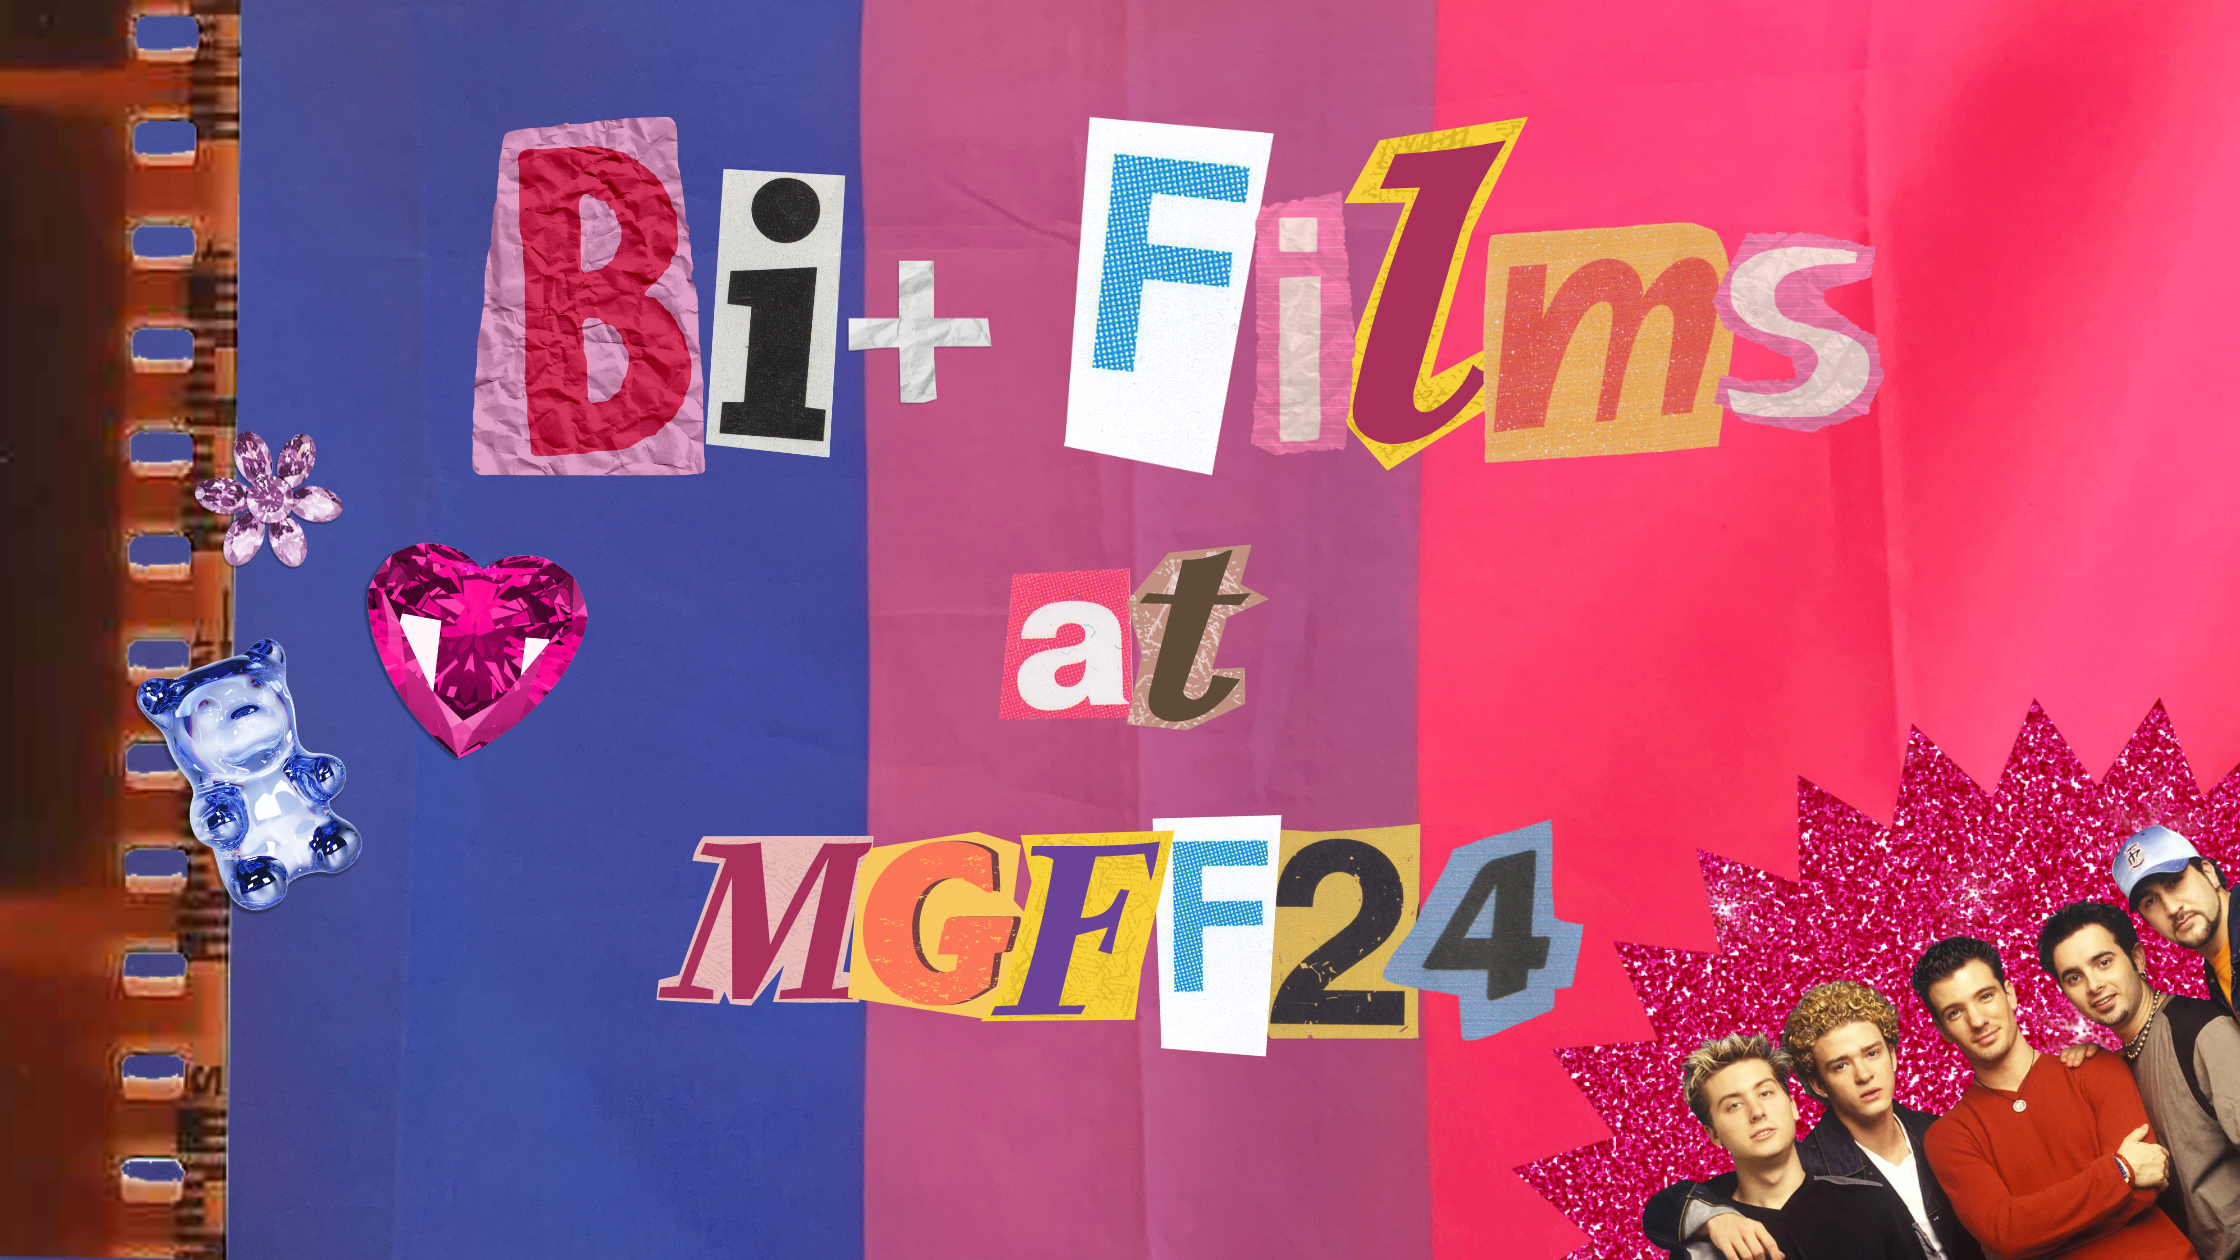 The bisexual flag is the background. Gem's decorate the image. There is also a picture of NSYNC. Text reads 'Bi+ Films at MGFF24'